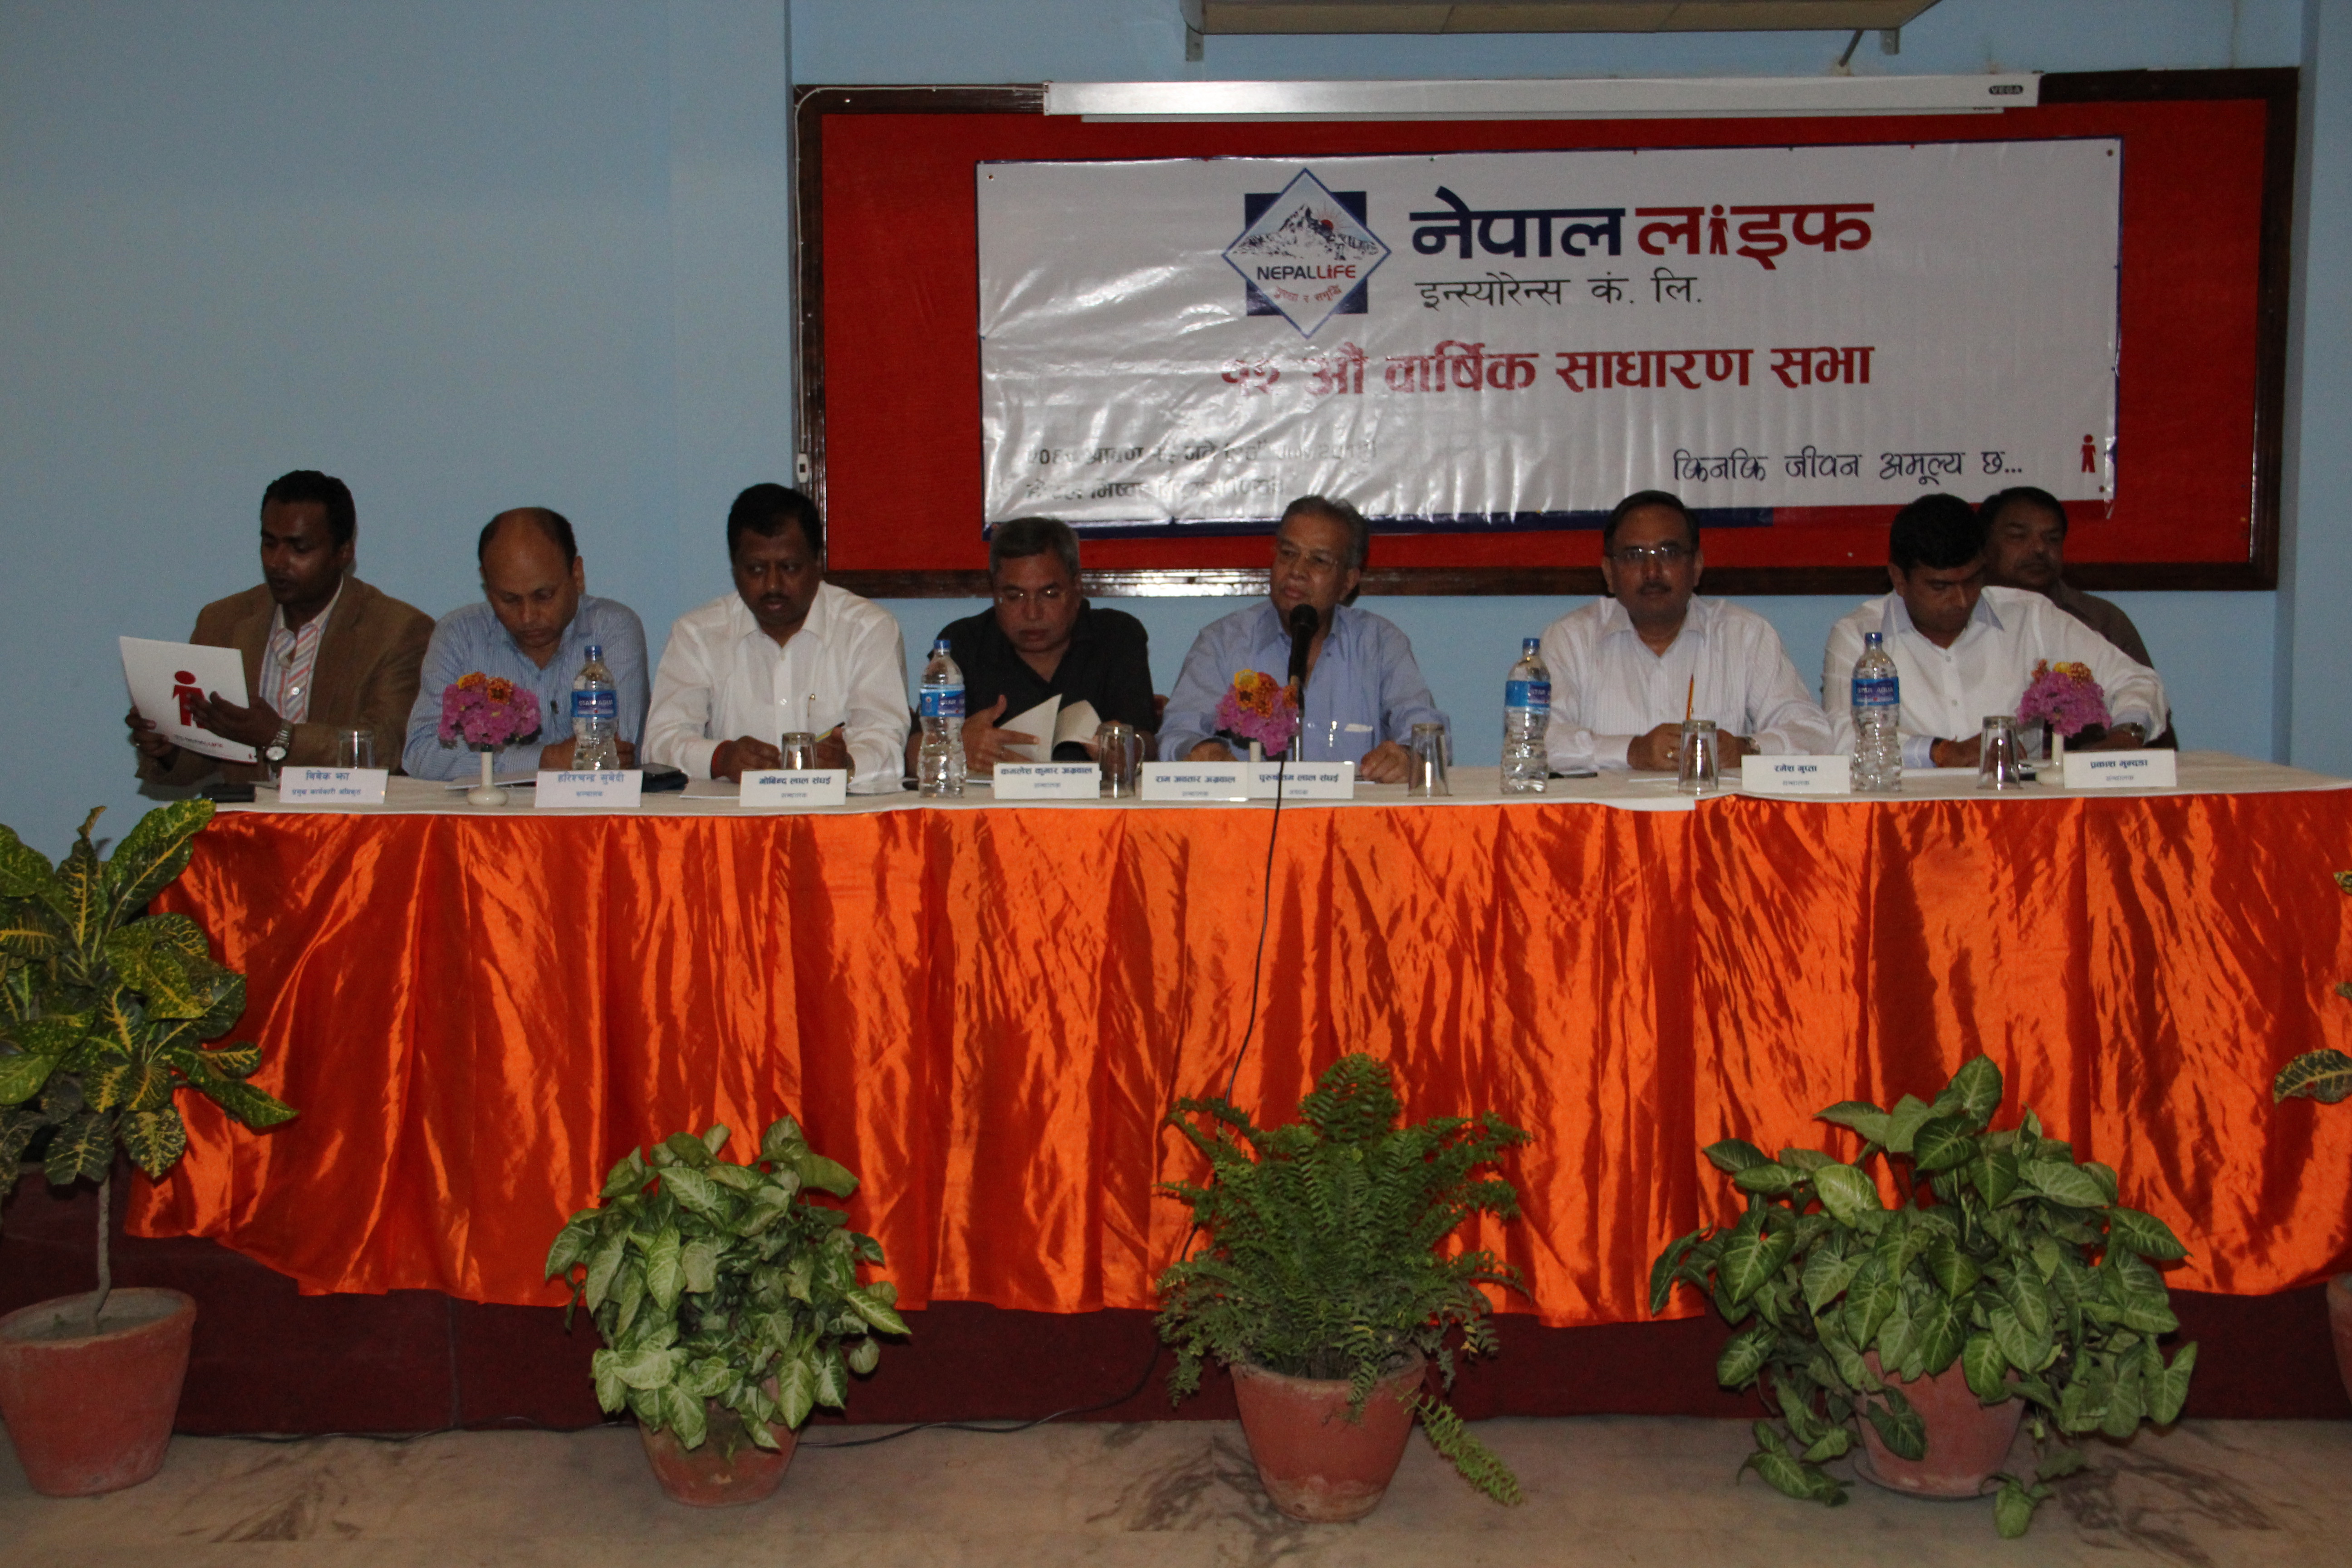 12th Annual General Meeting